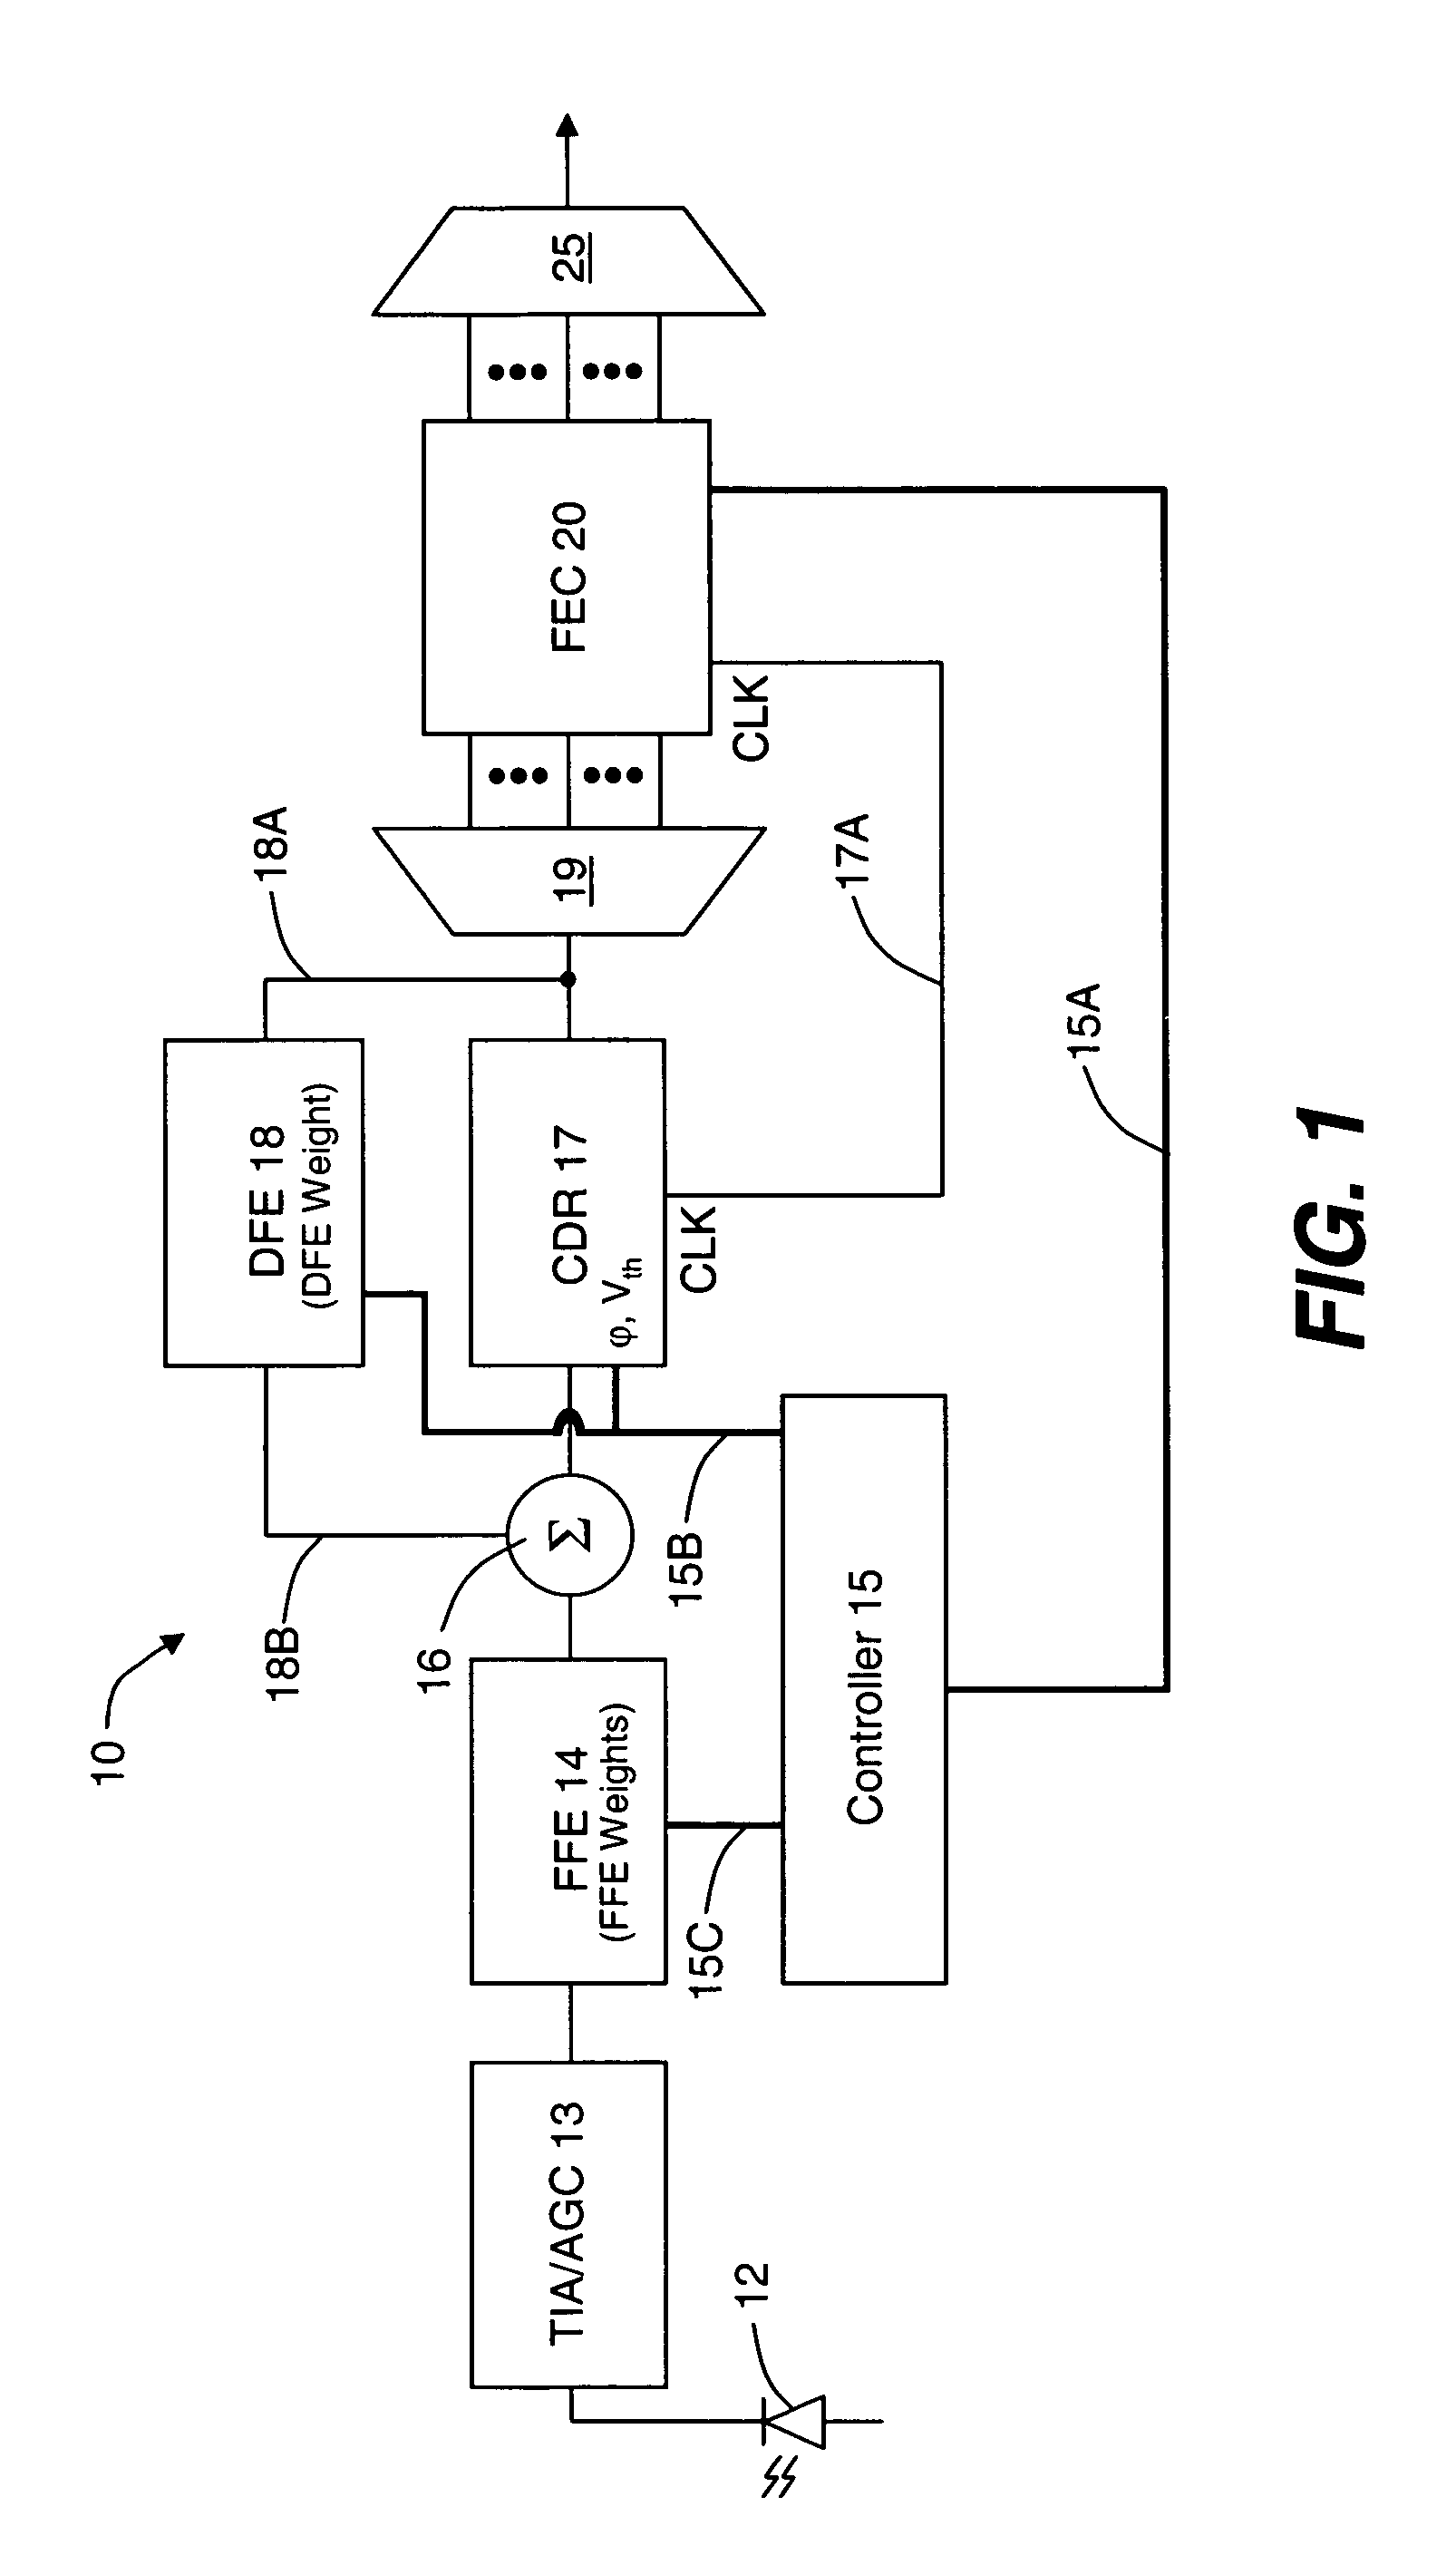 Pattern-dependent error counts for use in correcting operational parameters in an optical receiver